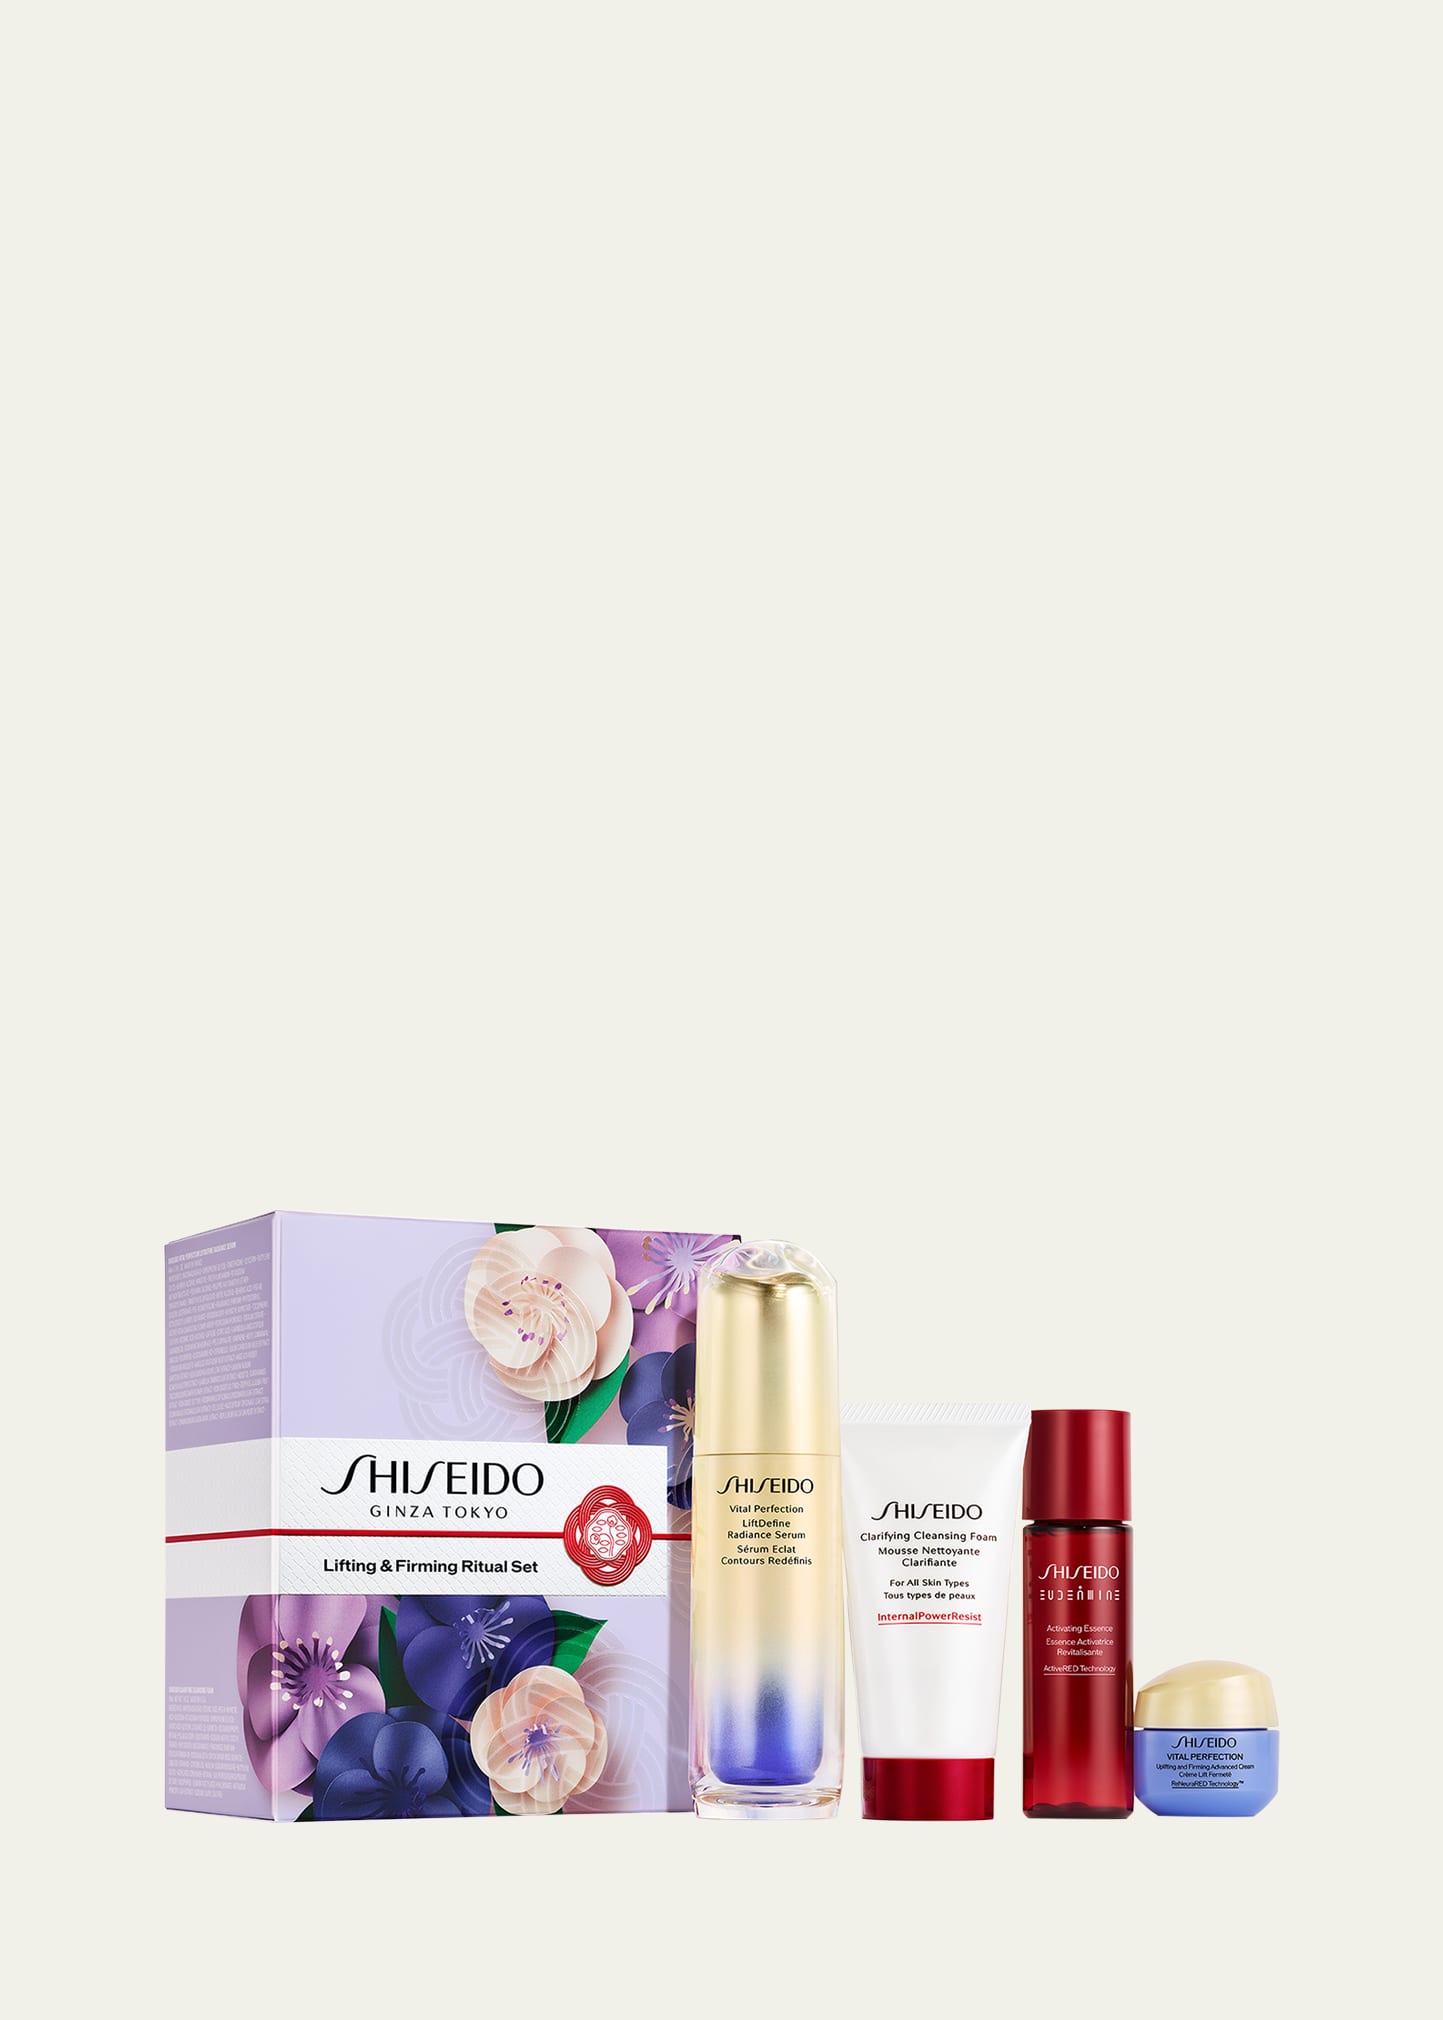 Shiseido Limited Edition Lifting & Firming Ritual Set ($215 Value) In White